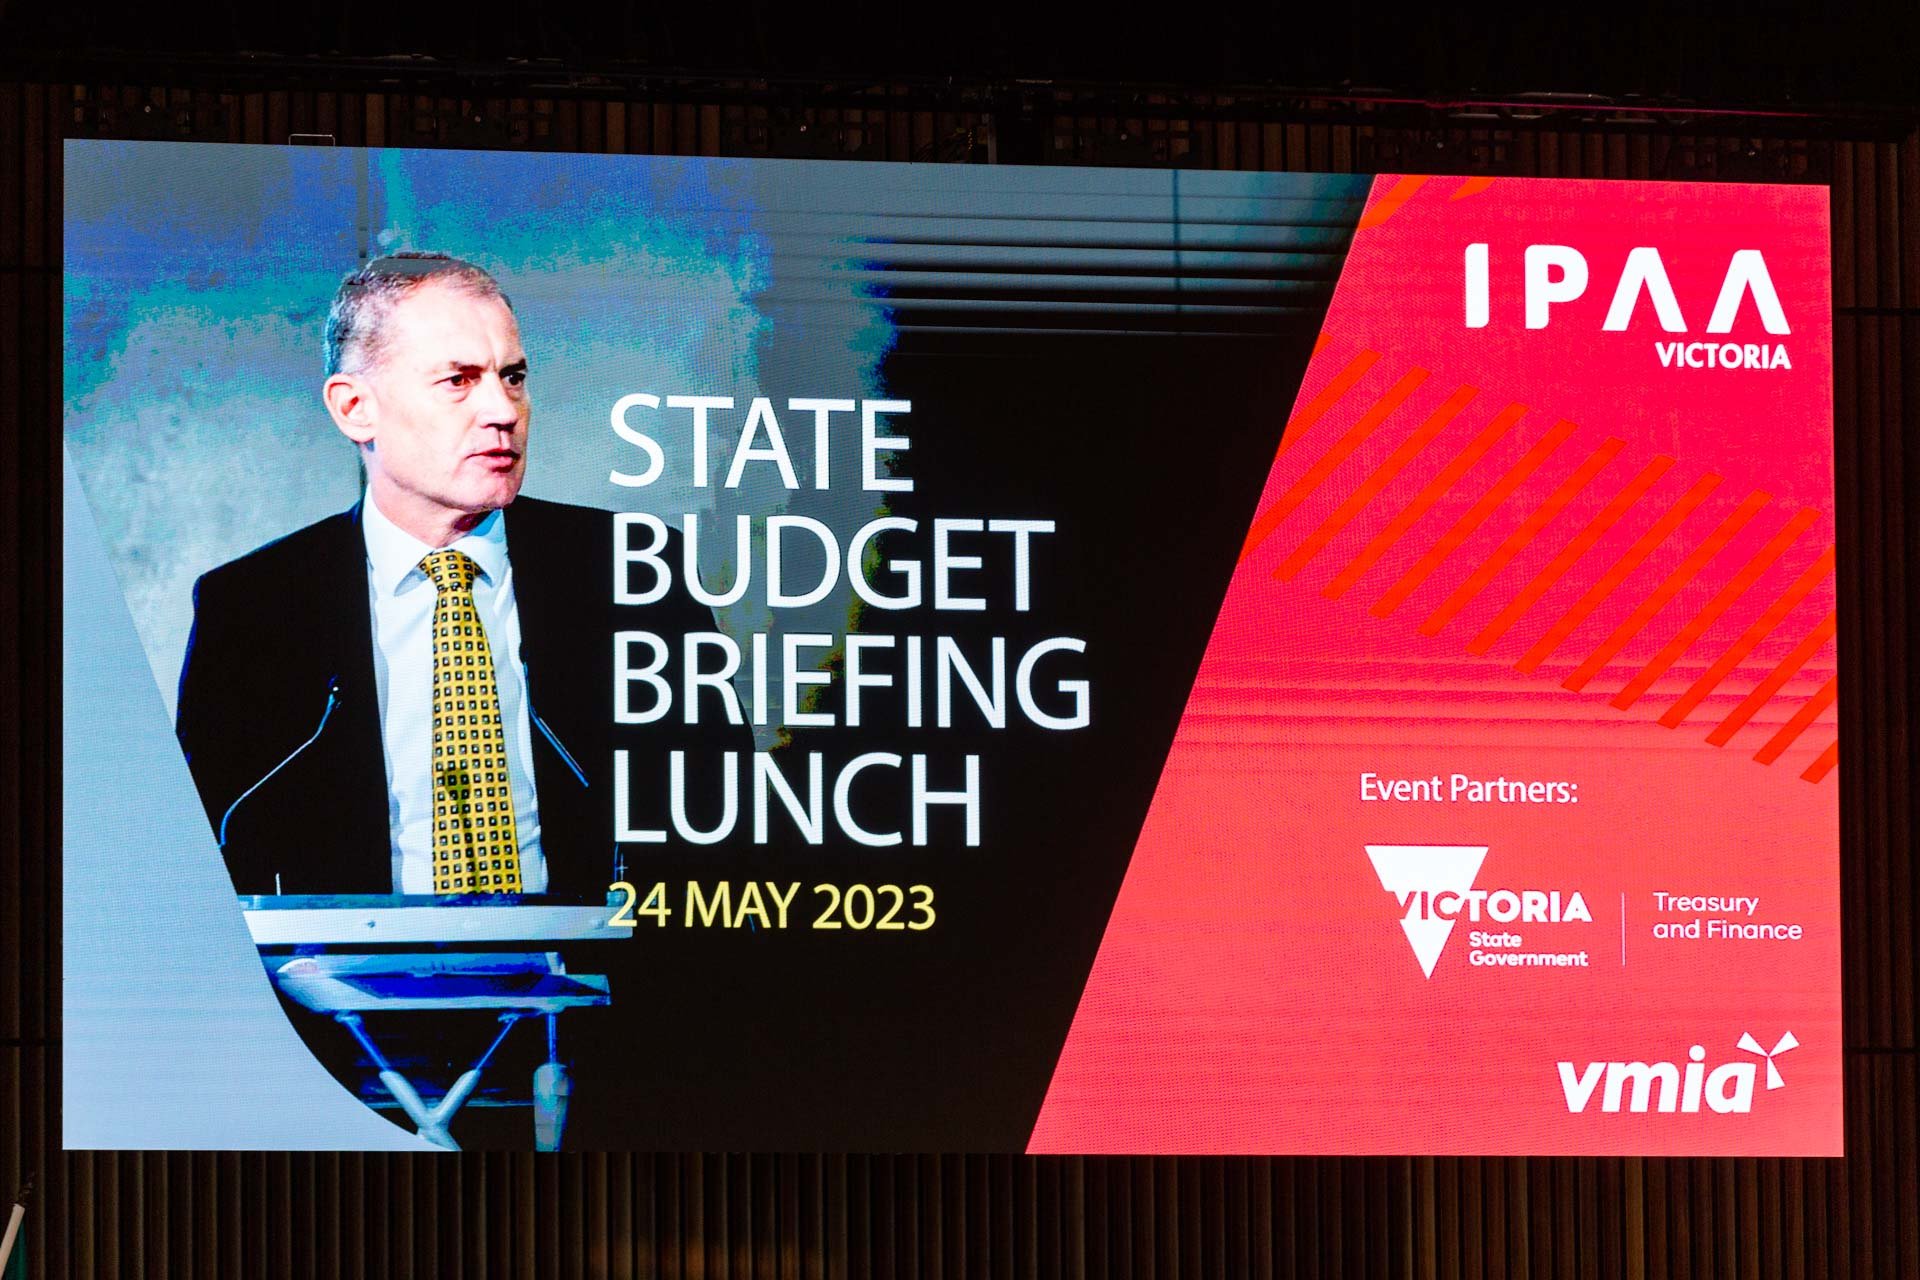 001 - IPAA State Budget Briefing - 24May23.jpg